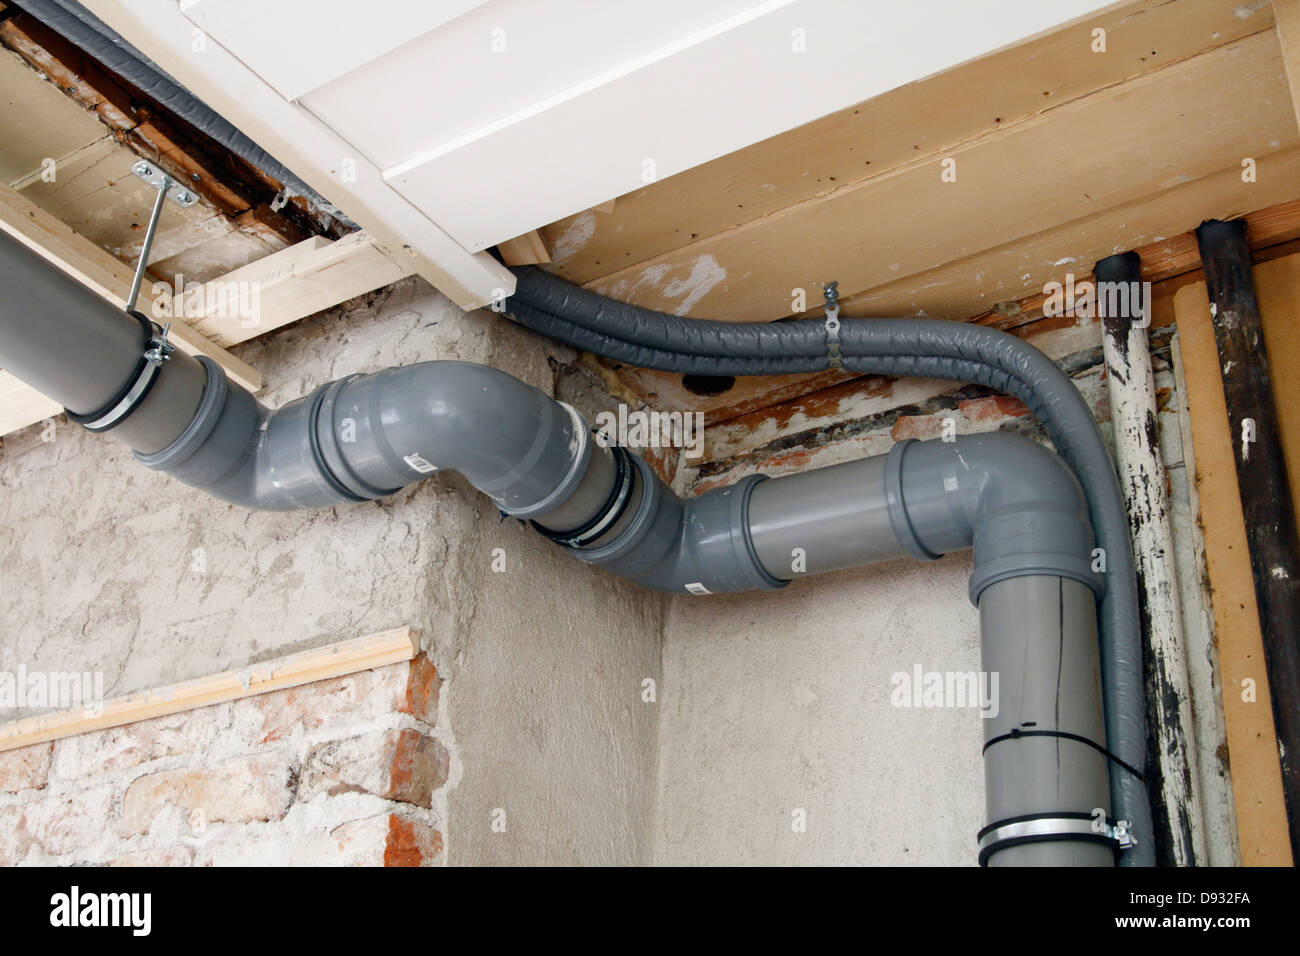 Low angle view of drain pipes Stock Photo